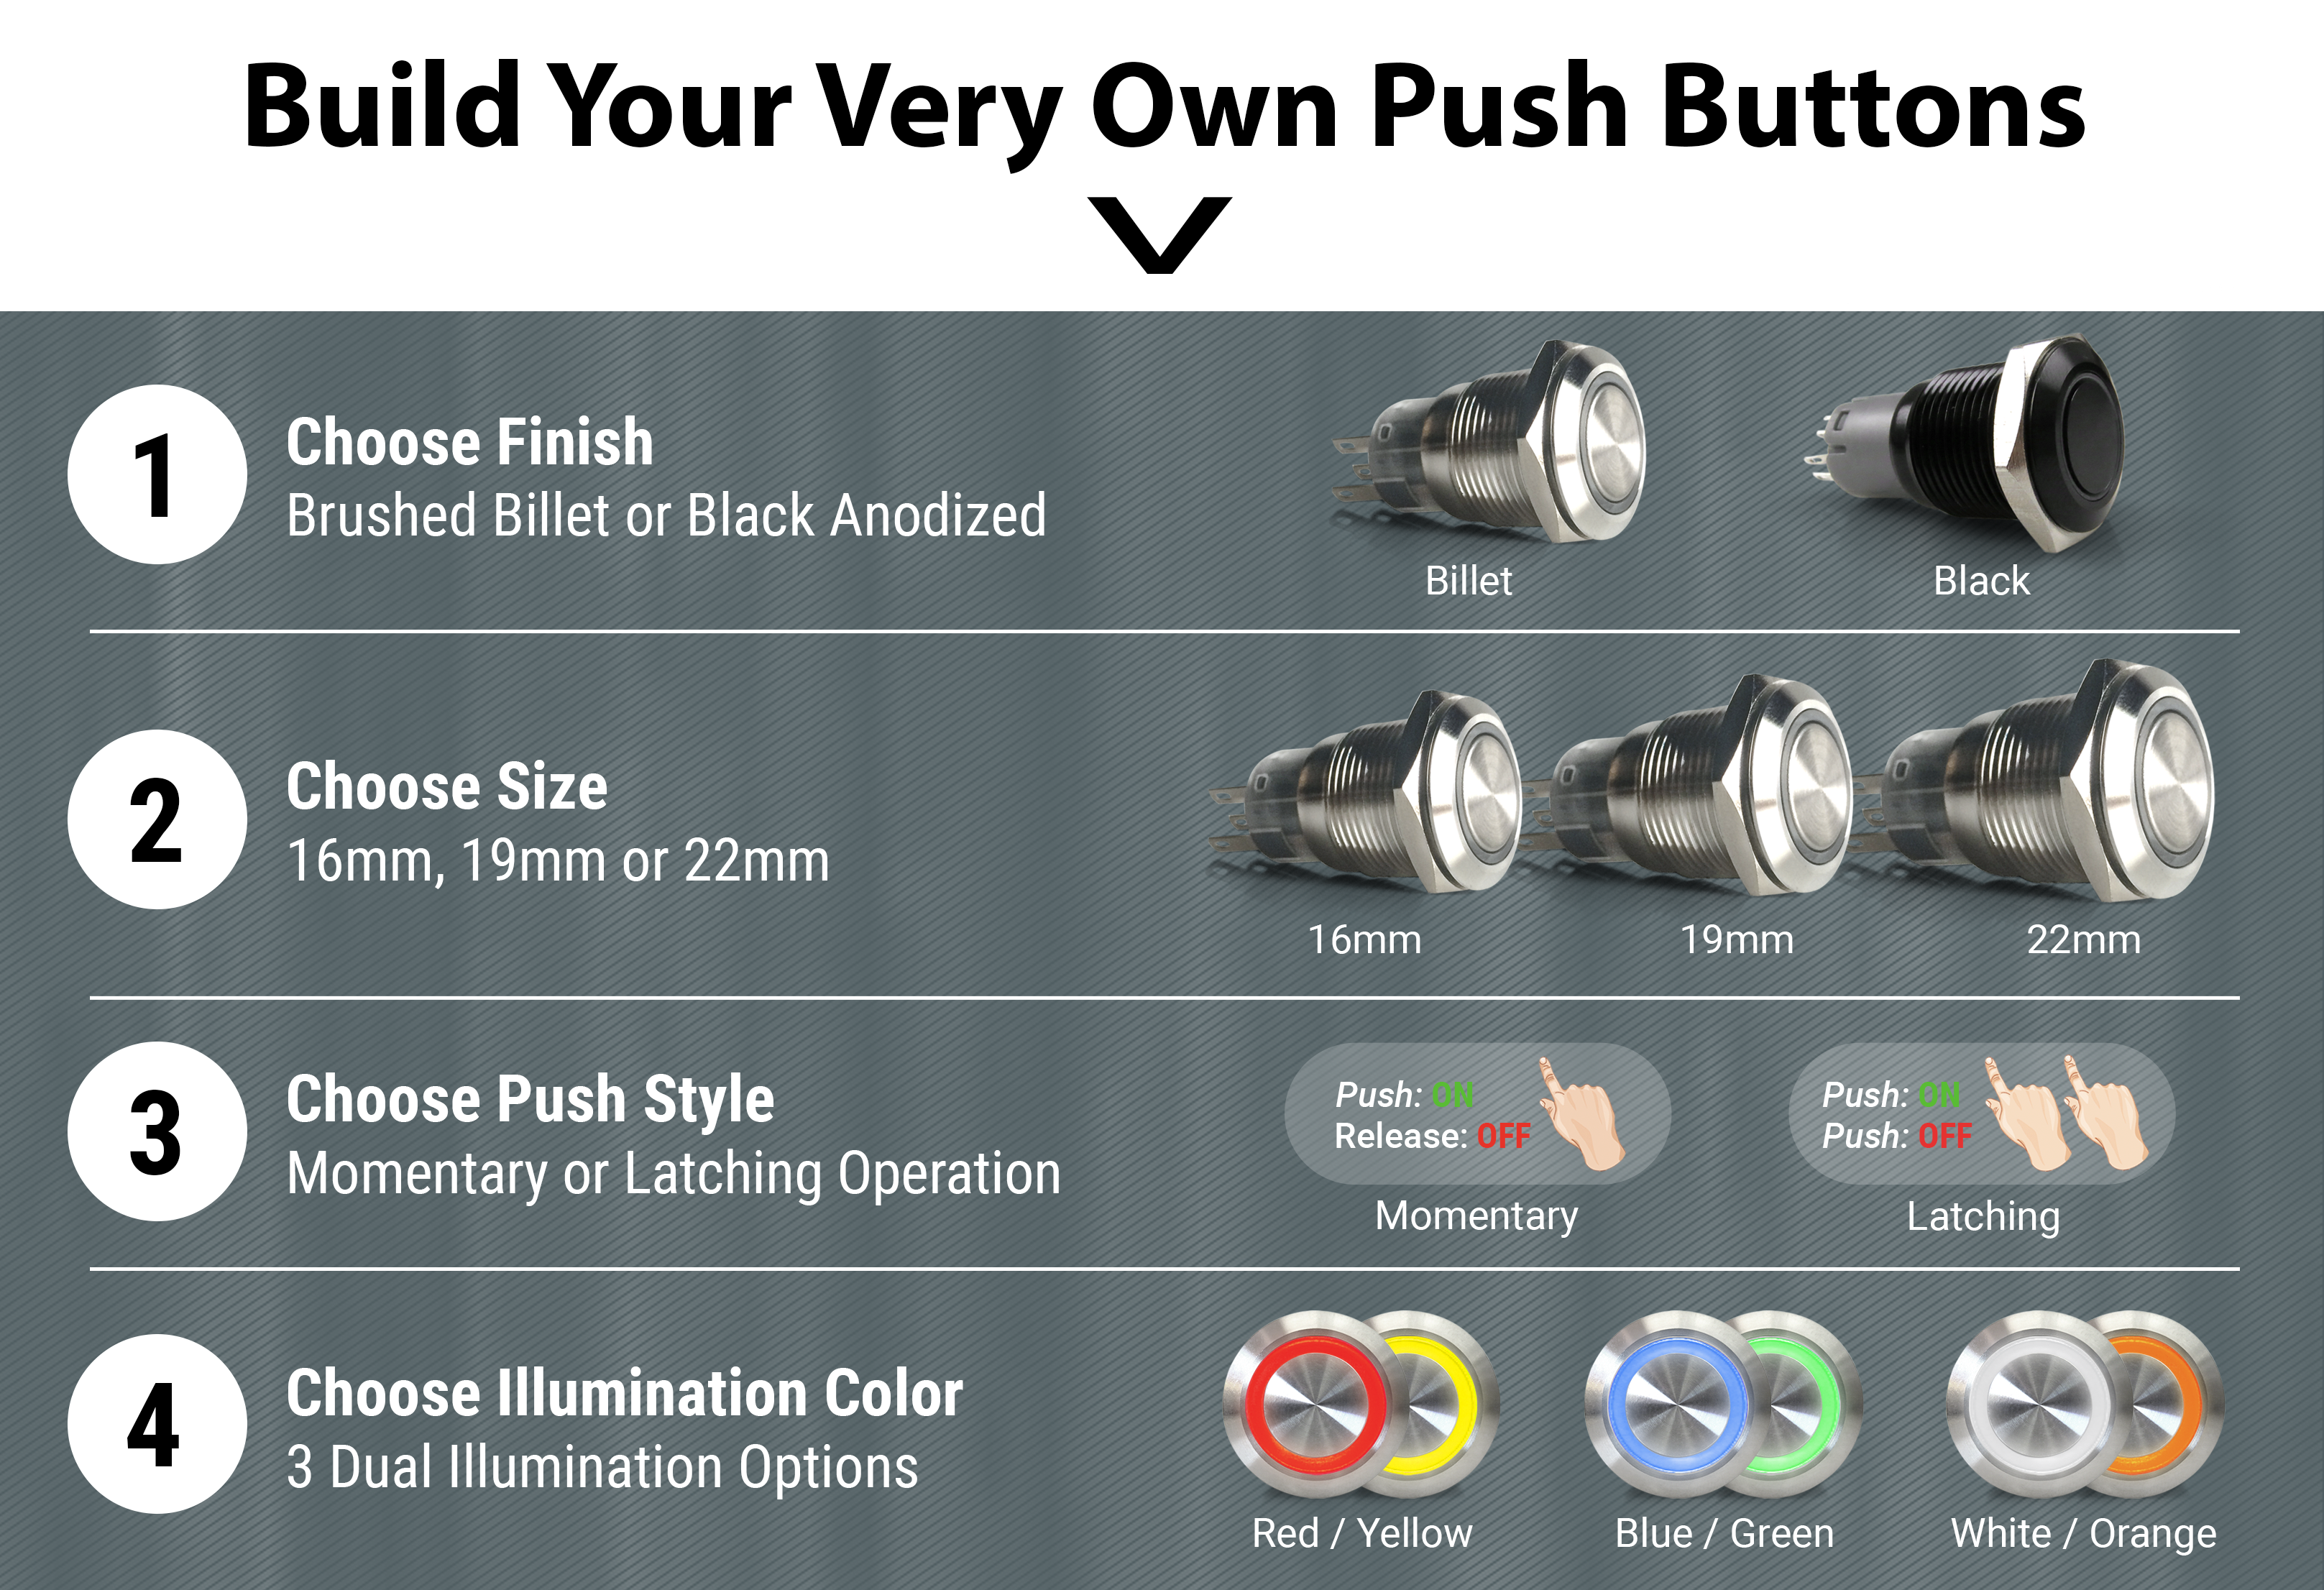 Build Your Very Own Push Buttons > Steps